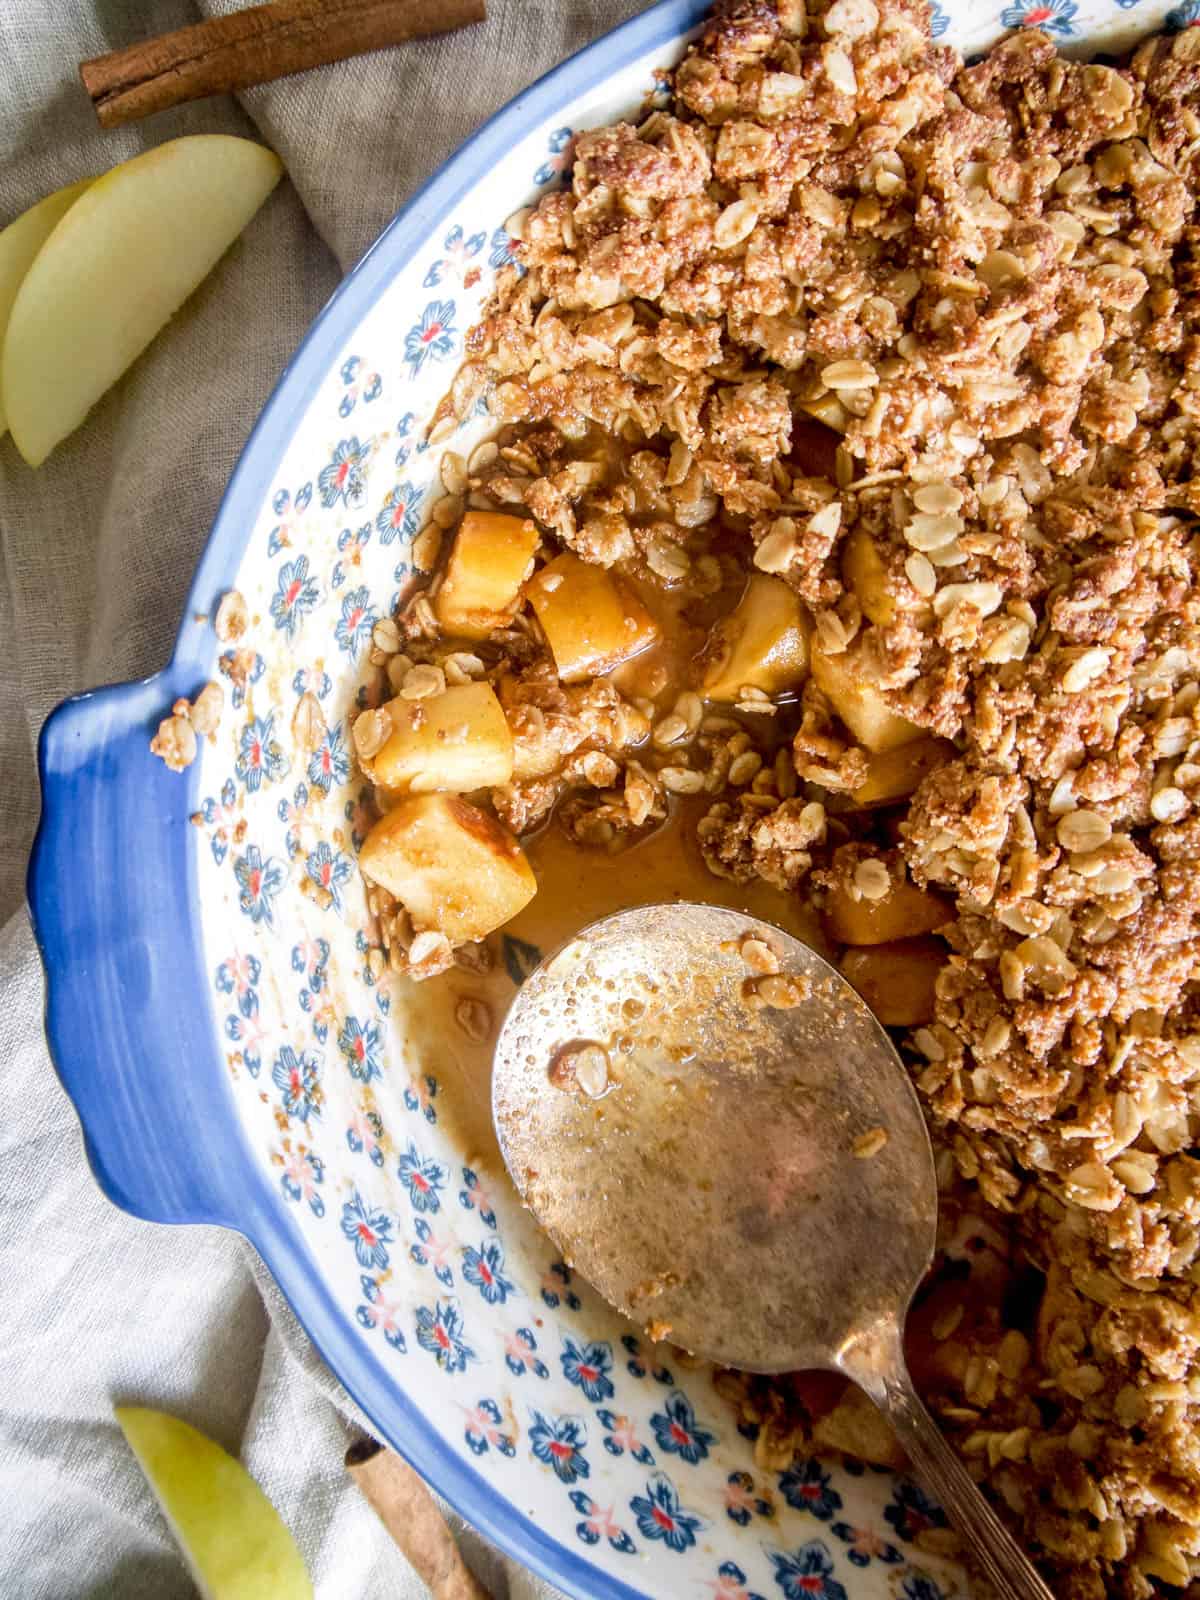 Finished vegan apple crisp with a spoon in the dish.